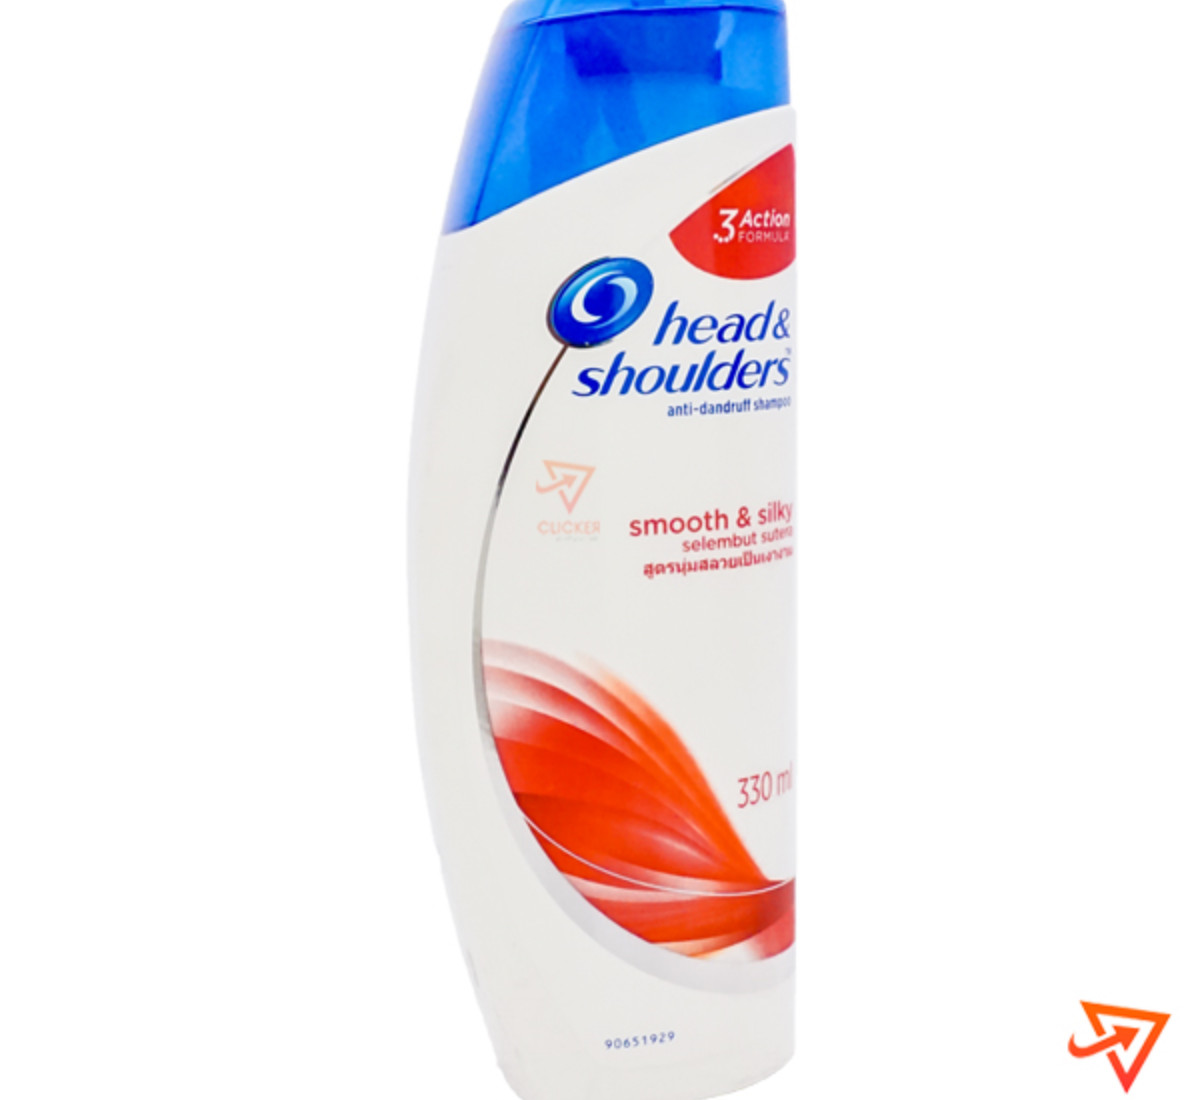 Clicker product 330ml HEAD&SHOULDER'S anti-dandruff shampoo-smooth and silky 1058